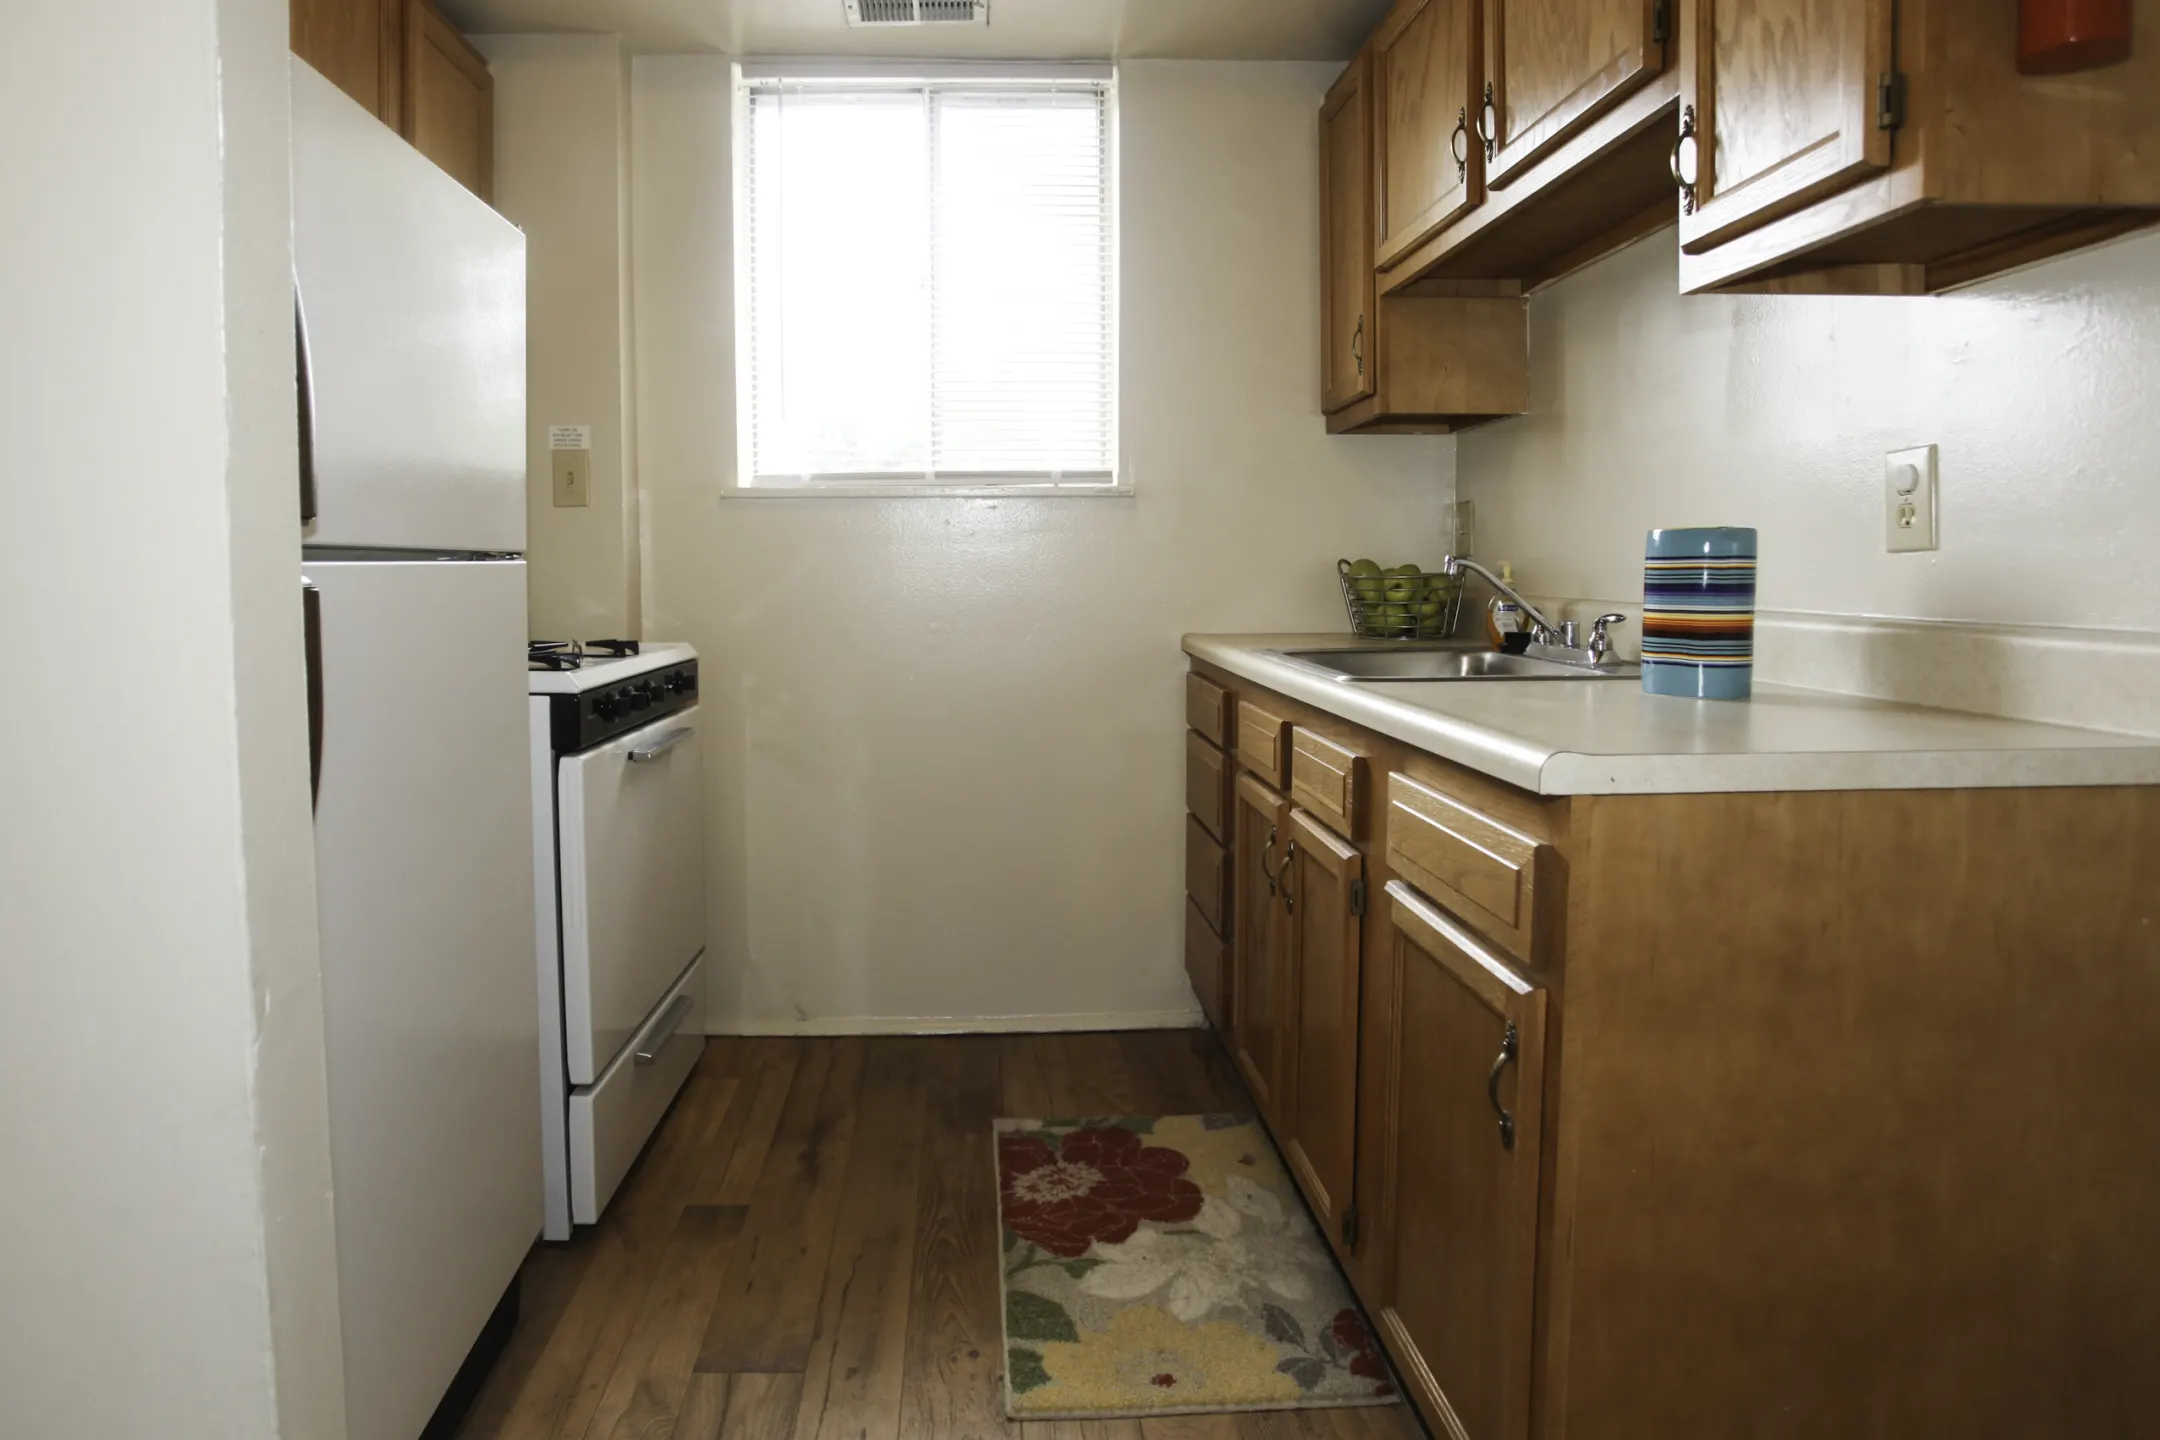 Kitchen - Parkside Gardens Apartments & Townhouses - Baltimore, MD